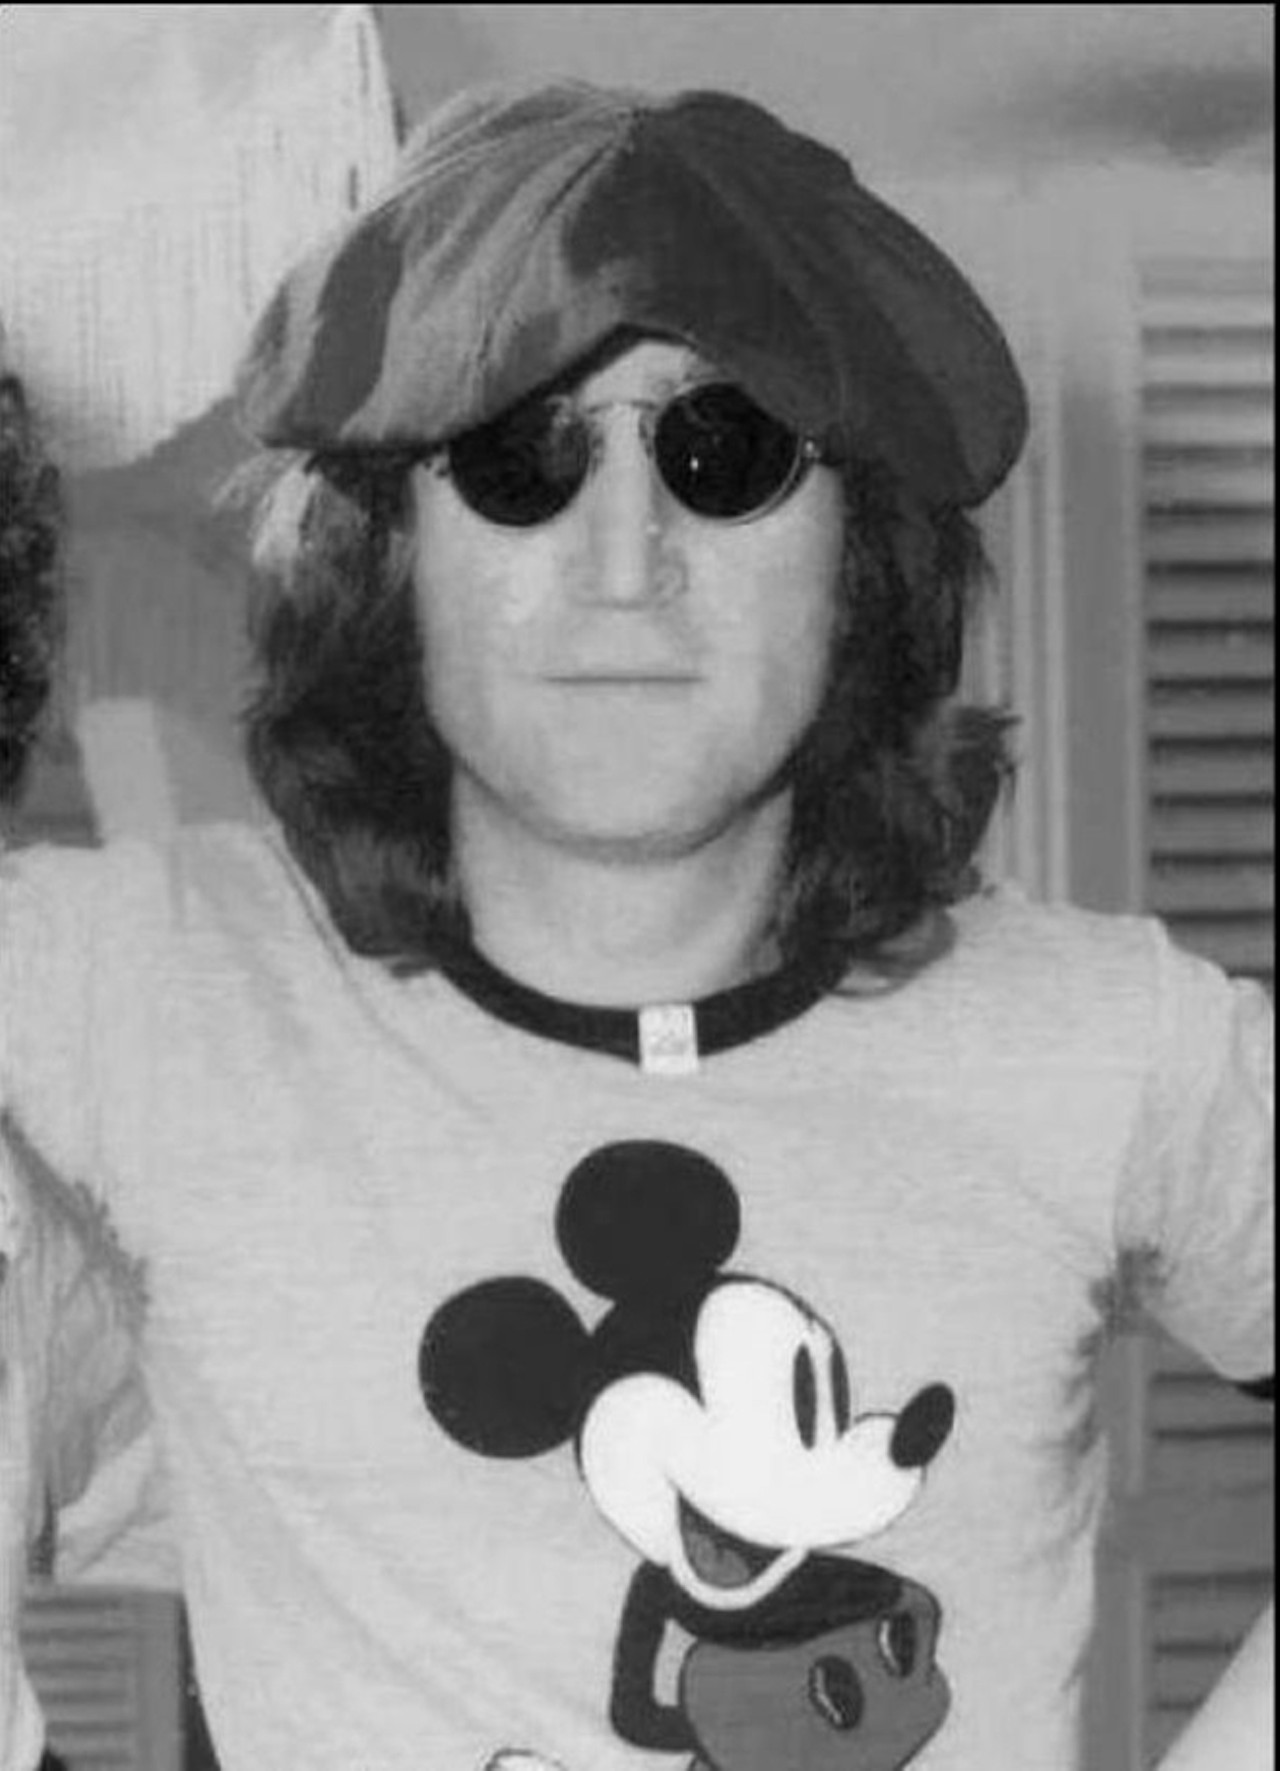 John Lennon of The Beatles signed the contract to effectively end the most lauded band of all-time at Disney World's Polynesian Hotel in 1974.
Photo via Plasticos y Decibelios